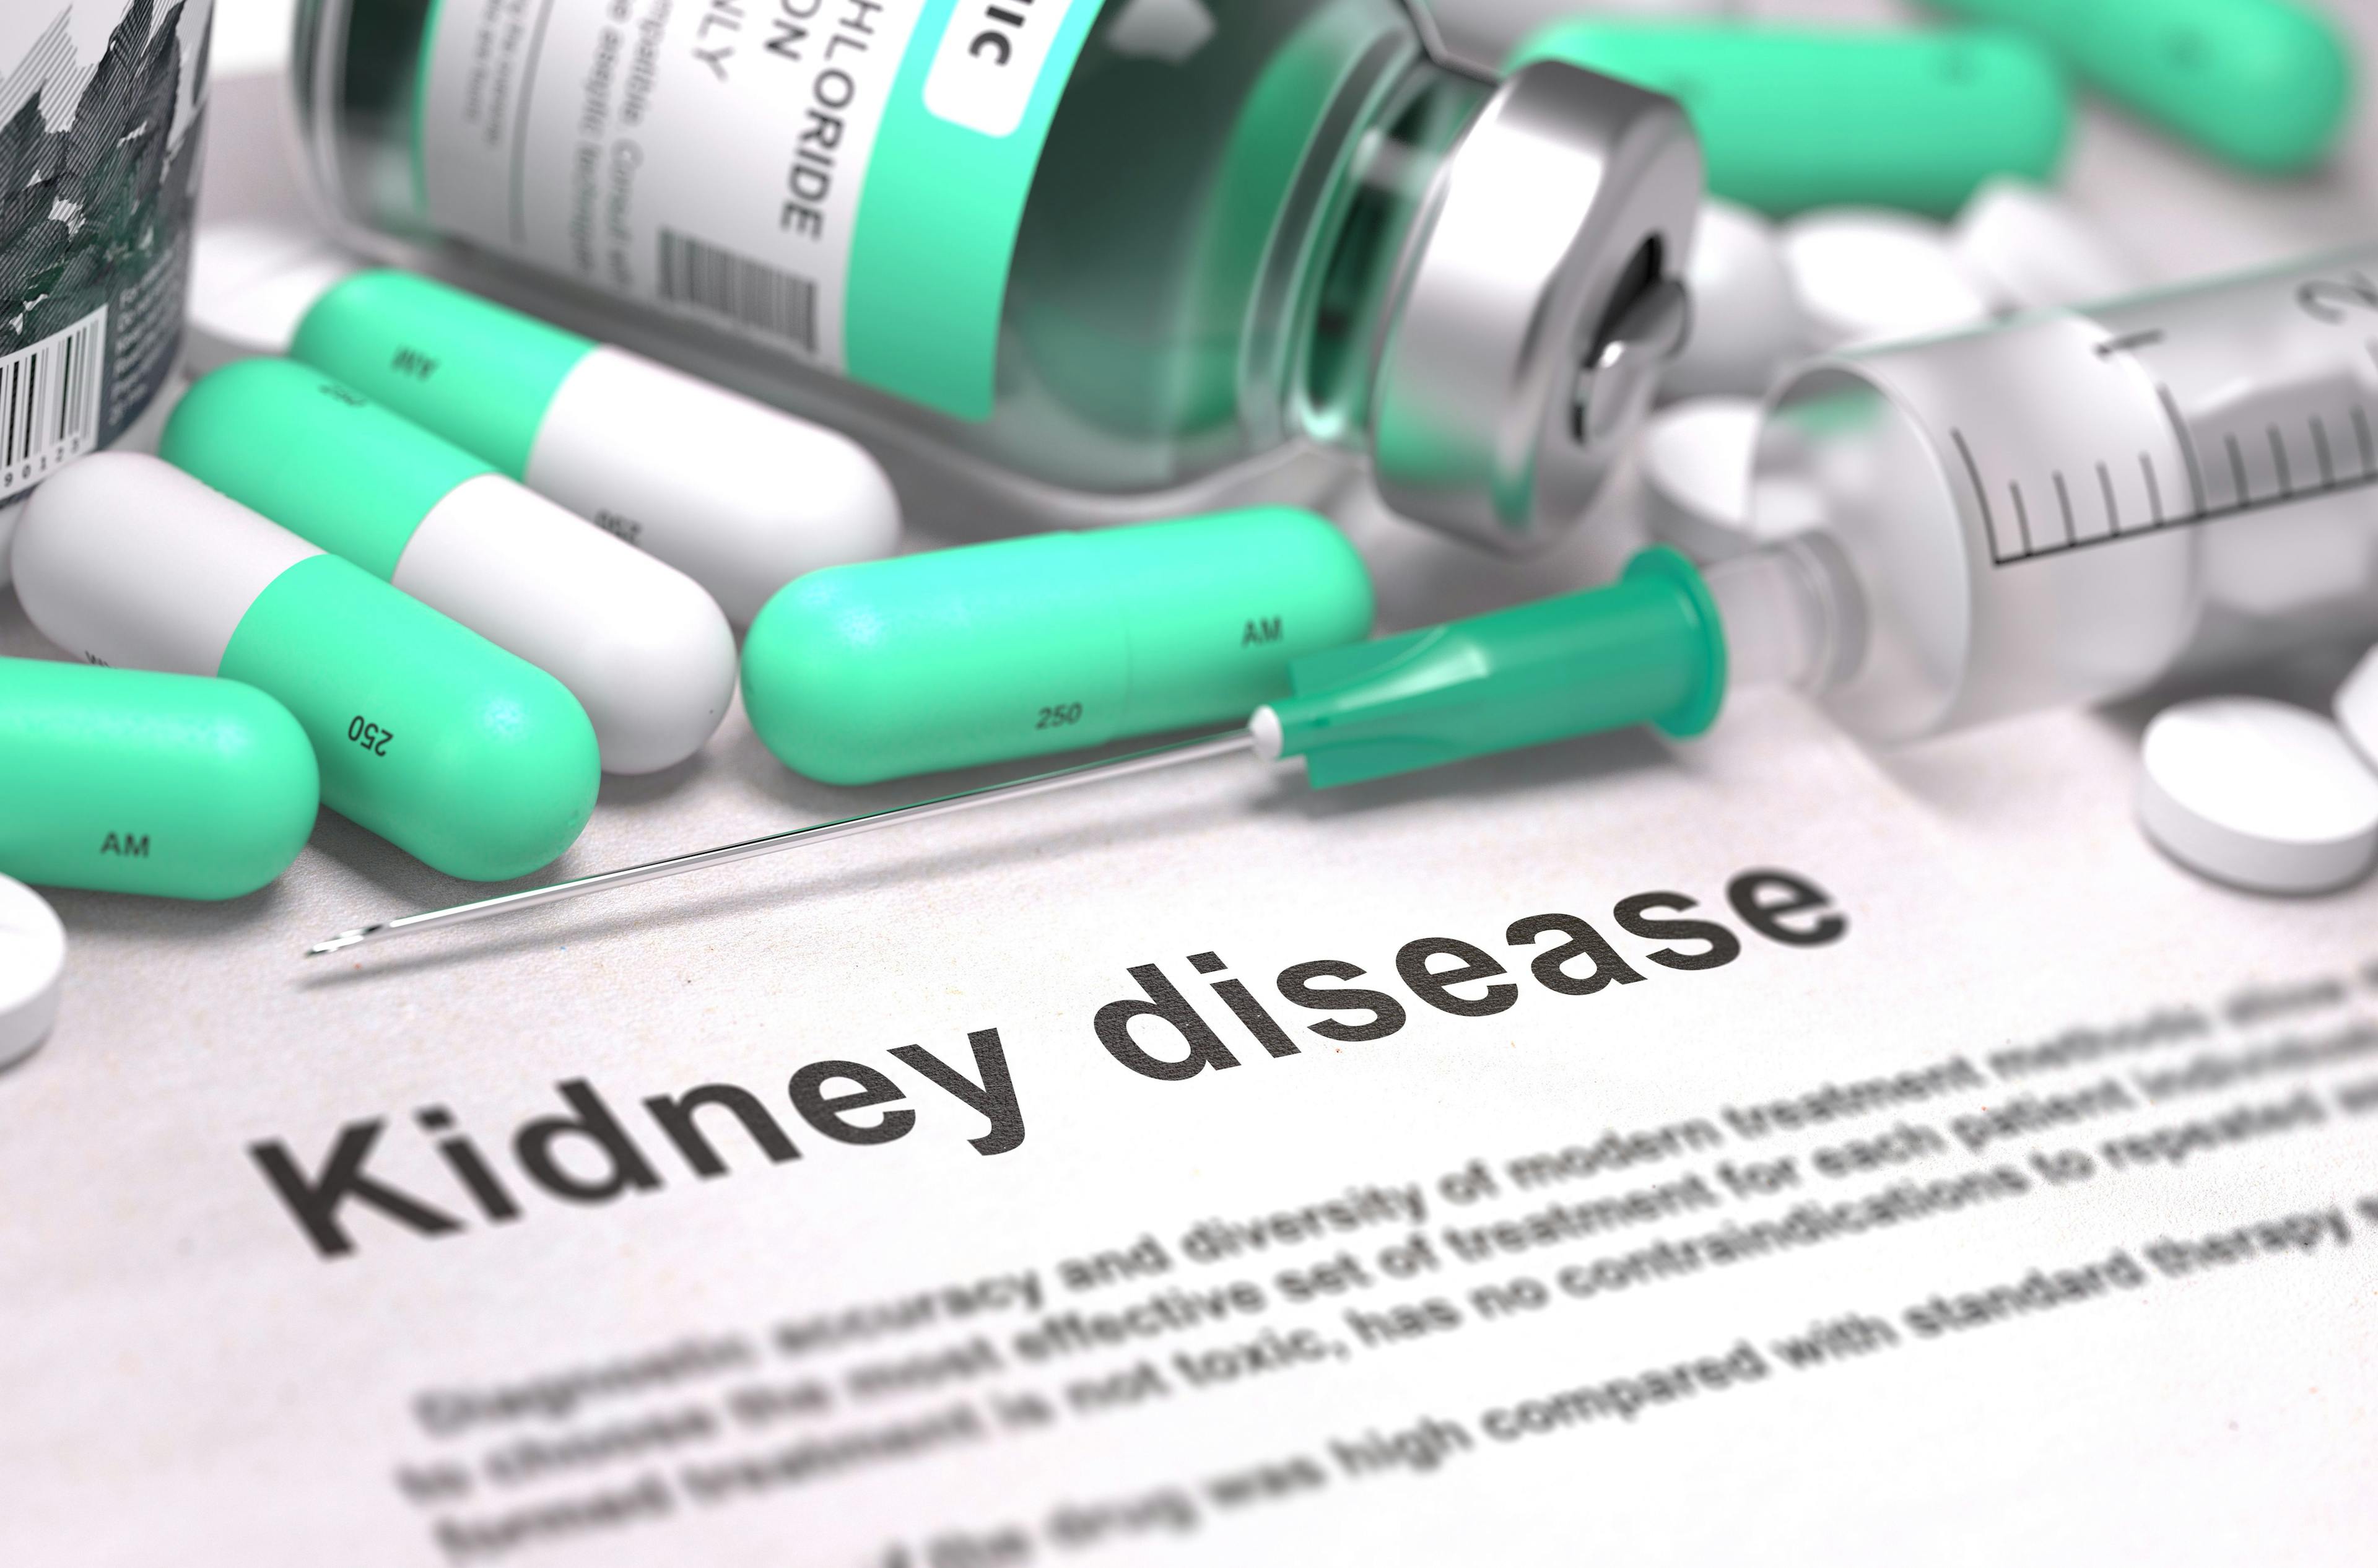 Debunking Falsehoods, Promoting Equity, Championing Clinical Advances on Tap for Kidney Week Sessions